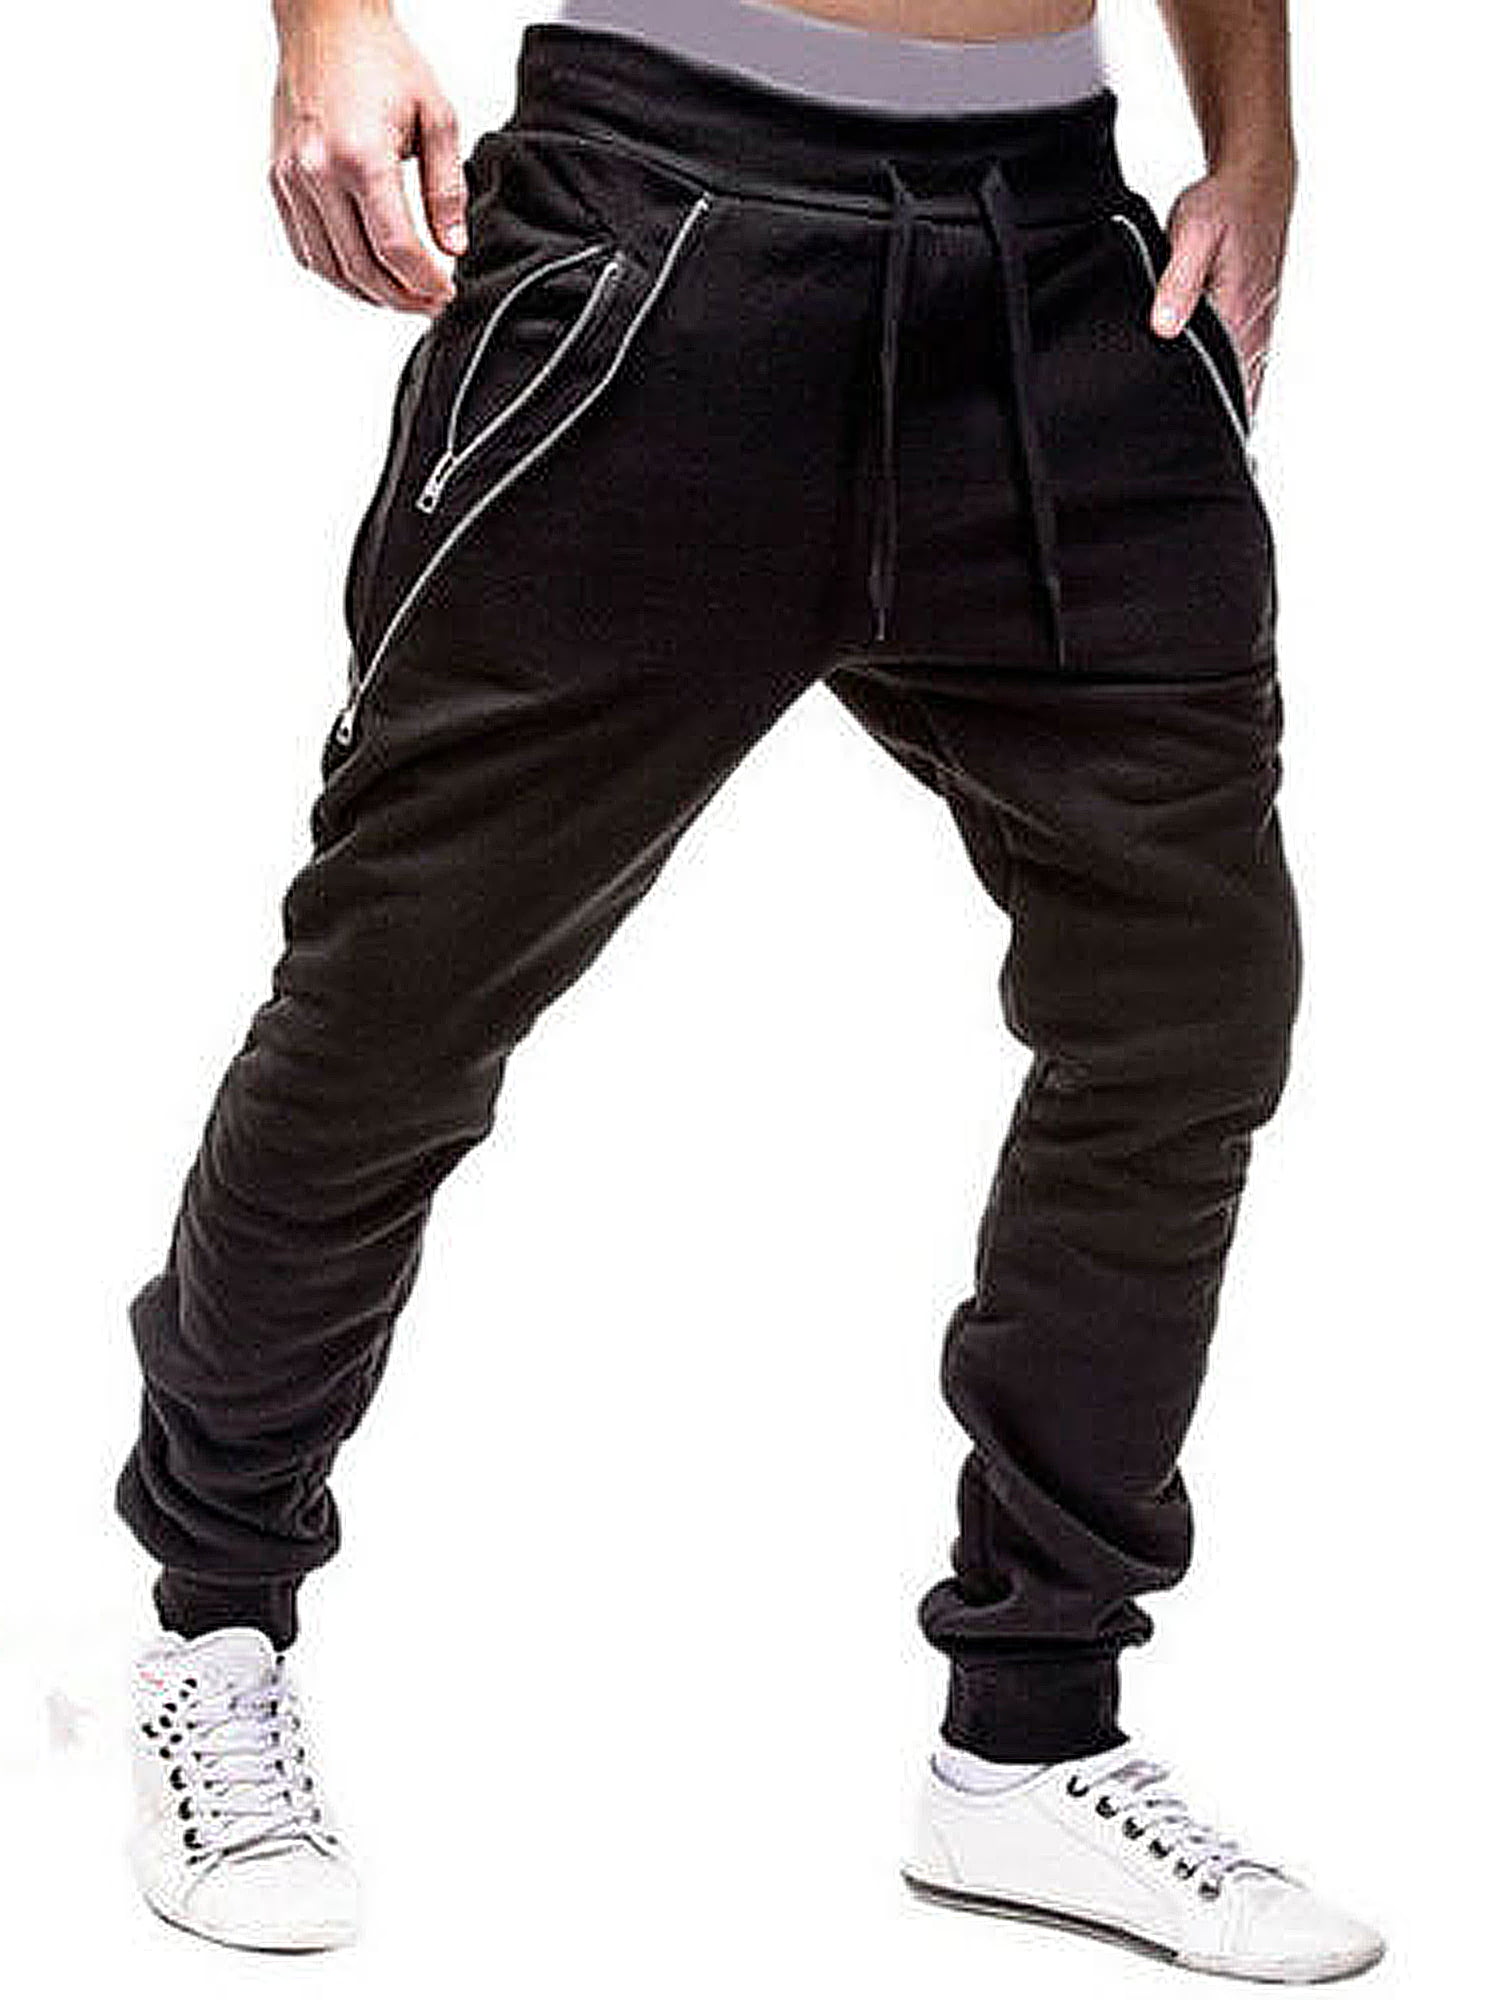 Eyicmarn - Men Sports Pants Long Trousers Tracksuit Fitness Workout ...